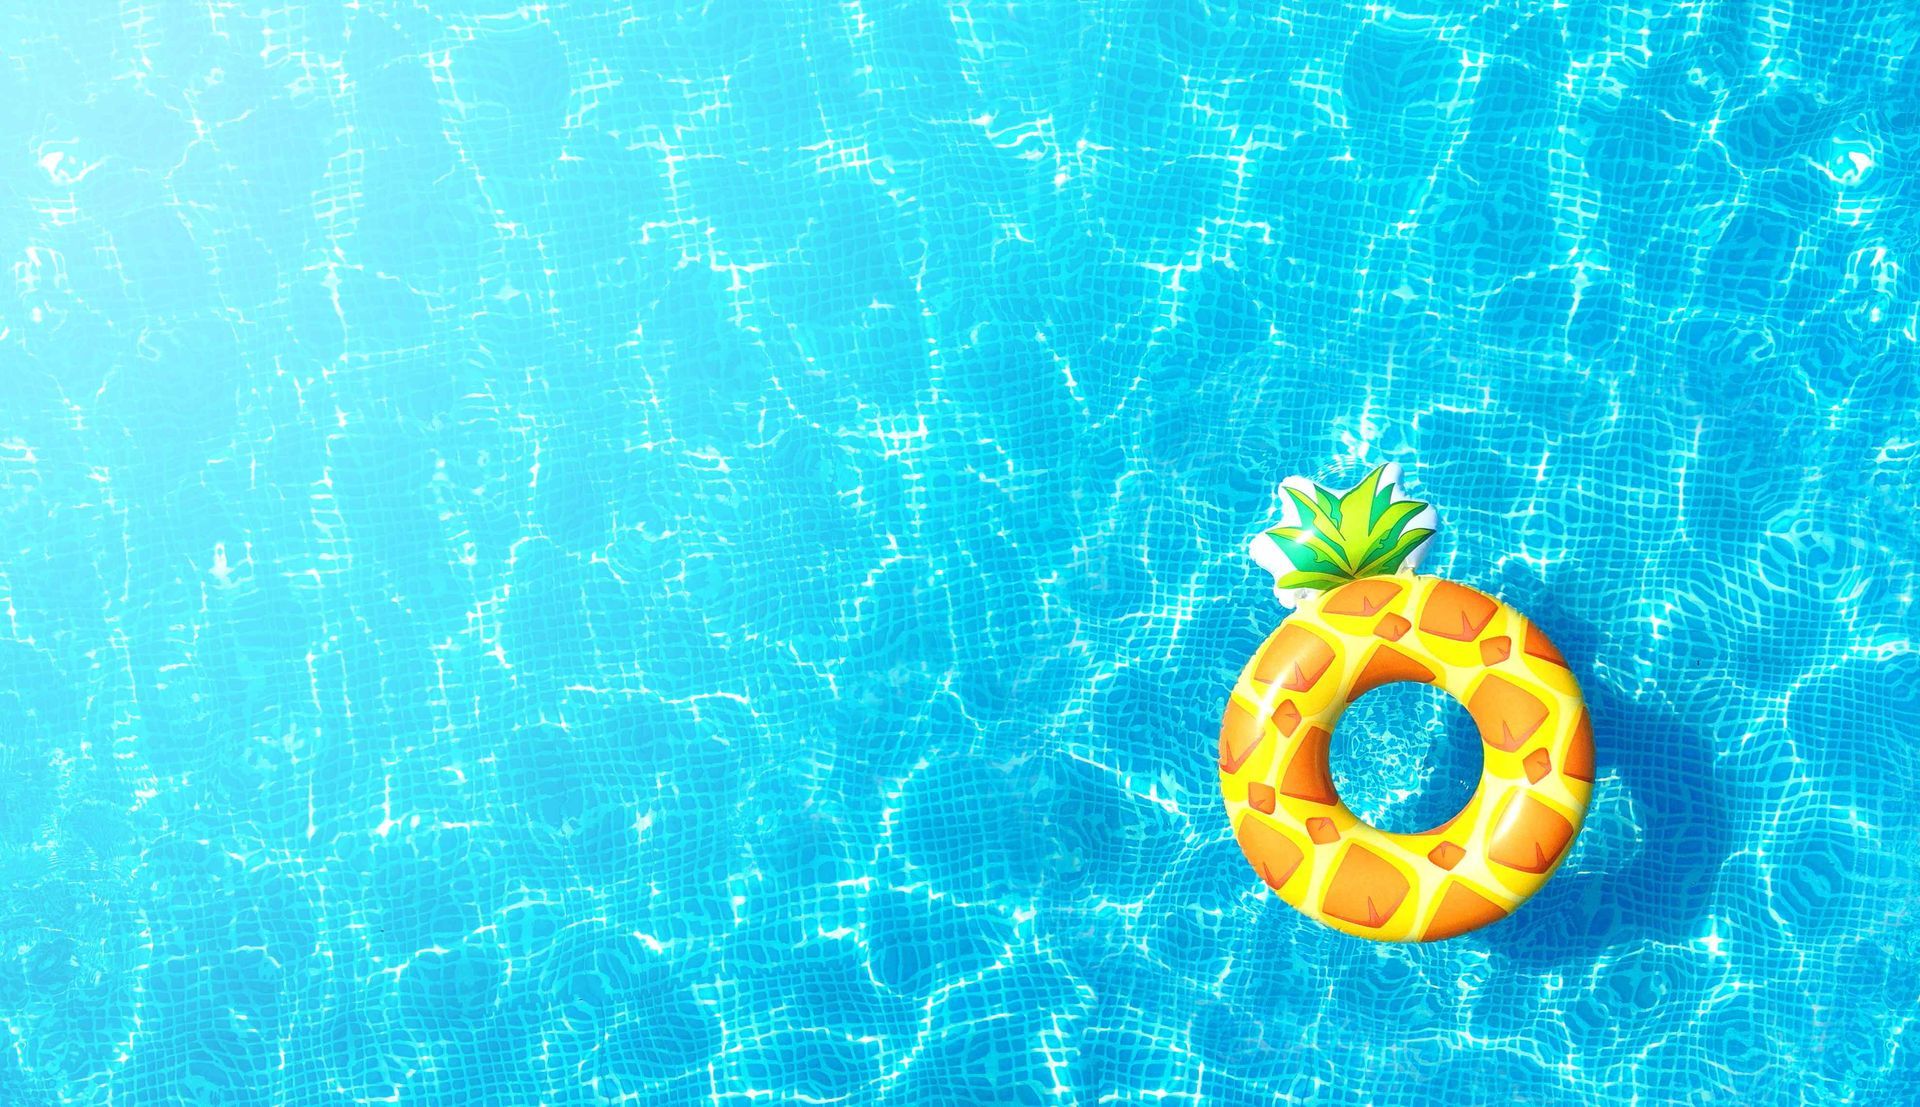 Backyard swimming pool reflecting light with a pineapple floaty in the water